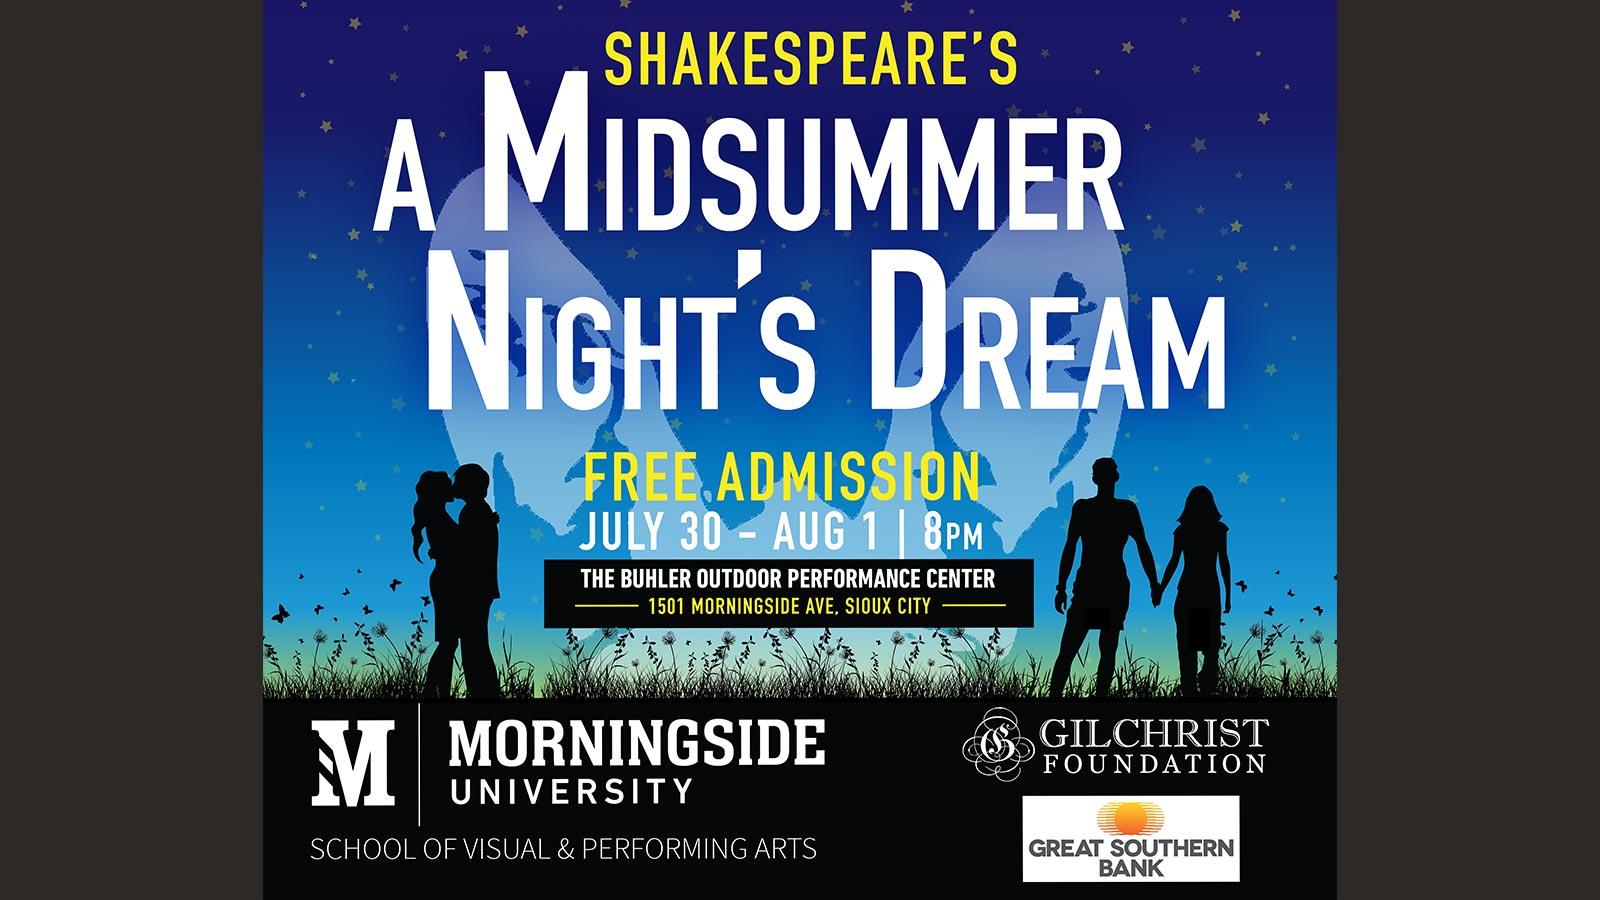 Image with information about Morningside's 2021 production of "A Midsummer Night's Dream"